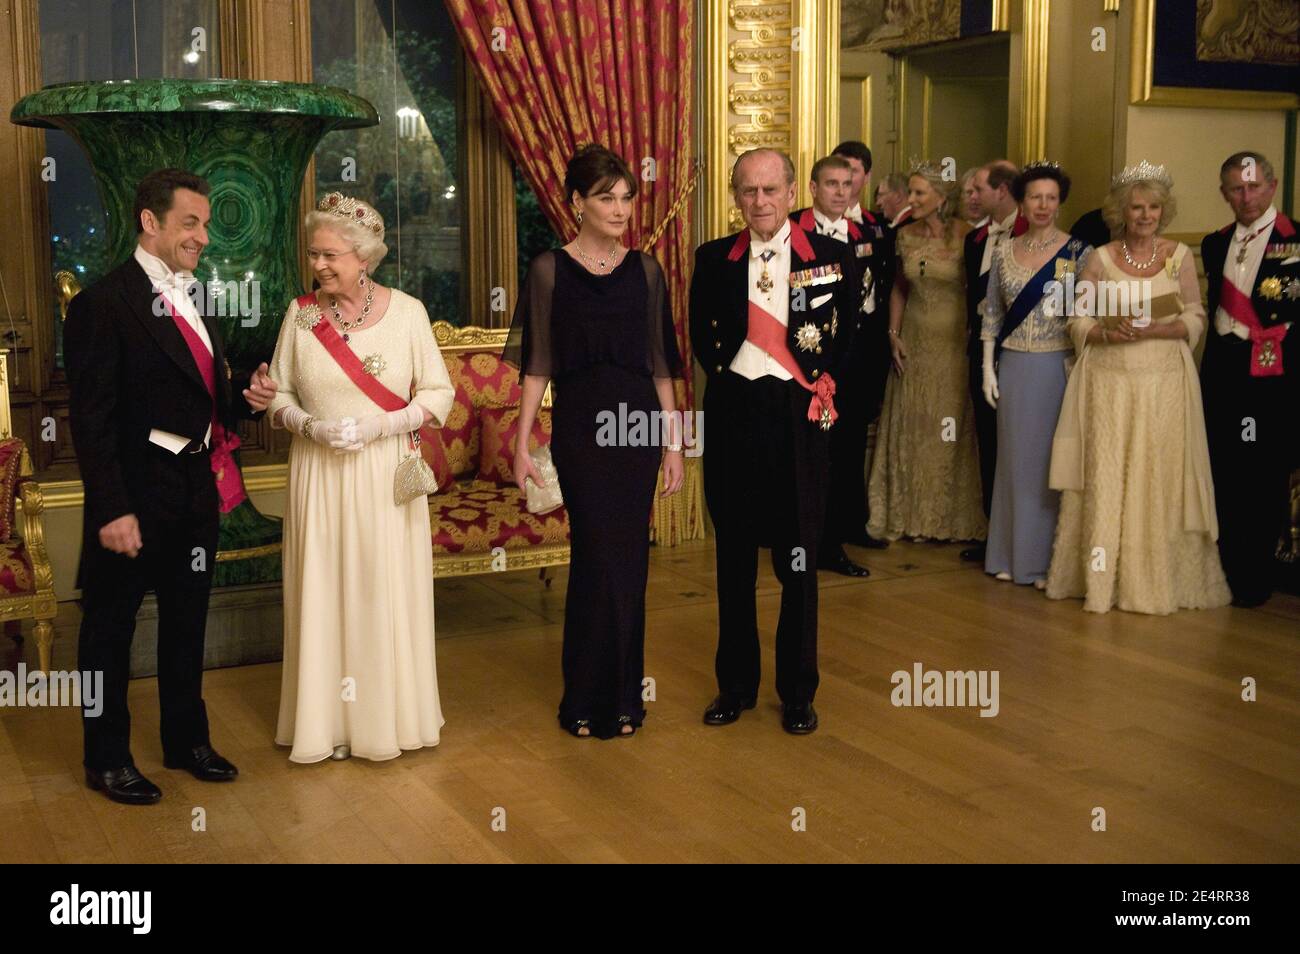 French President Nicolas Sarkozy, and his wife Carla Bruni-Sarkozy, Britain's Queen Elizabeth and husband Prince Philip pose for a family photograph before a State Banquet at Windsor Castle, UK, on March 26, 2008. Photo by Philippe Wojazer/Pool/ABACAPRESS.COM Stock Photo